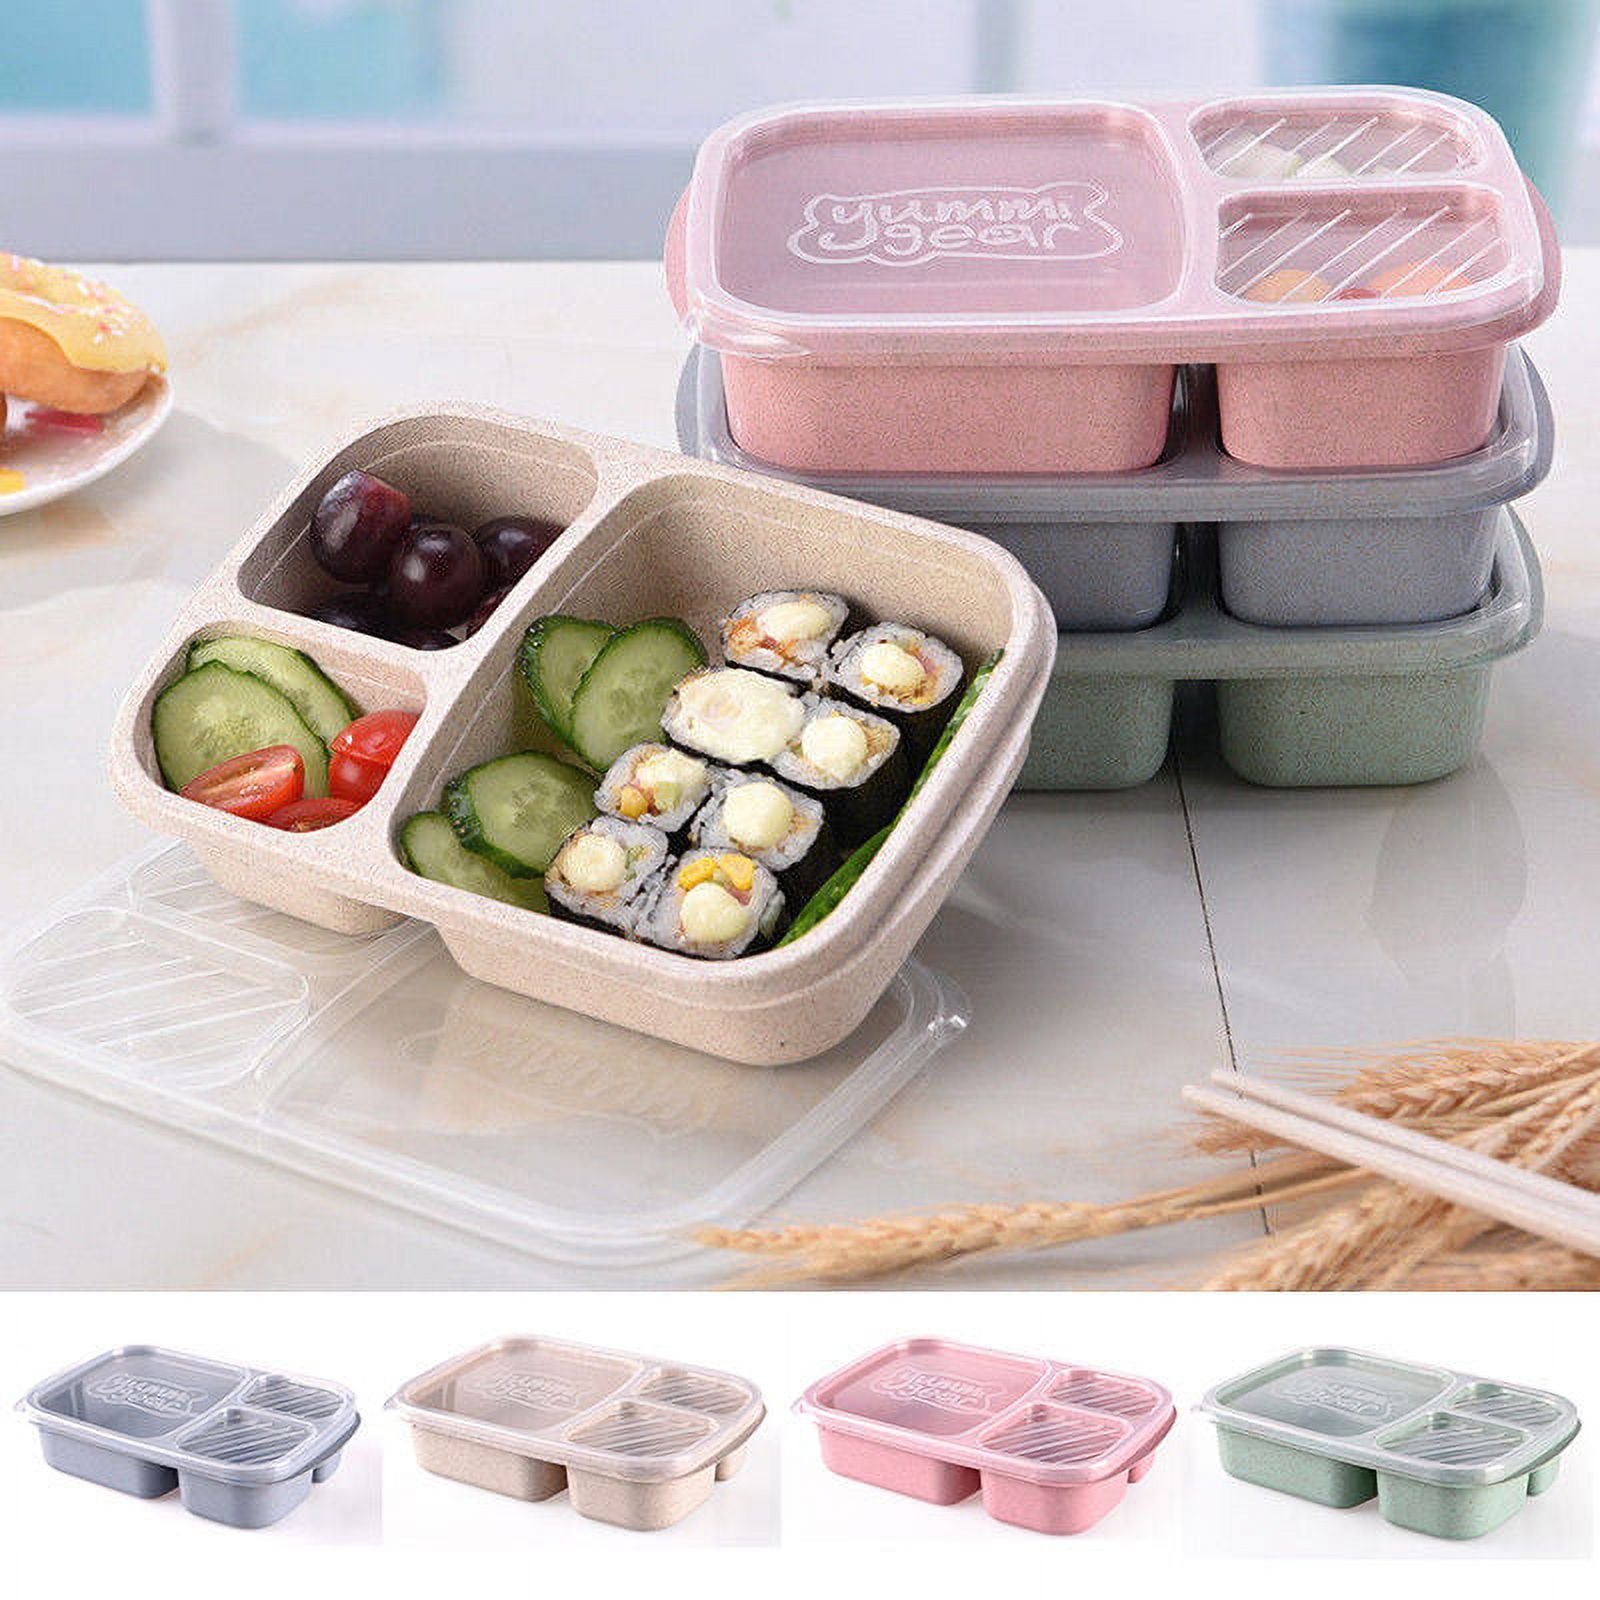 3 Layer Plastic Lunch Box Food Container Bento Lunch Boxes With 3-Compartment Microwave Picnic Food Container Storage Box - image 4 of 5